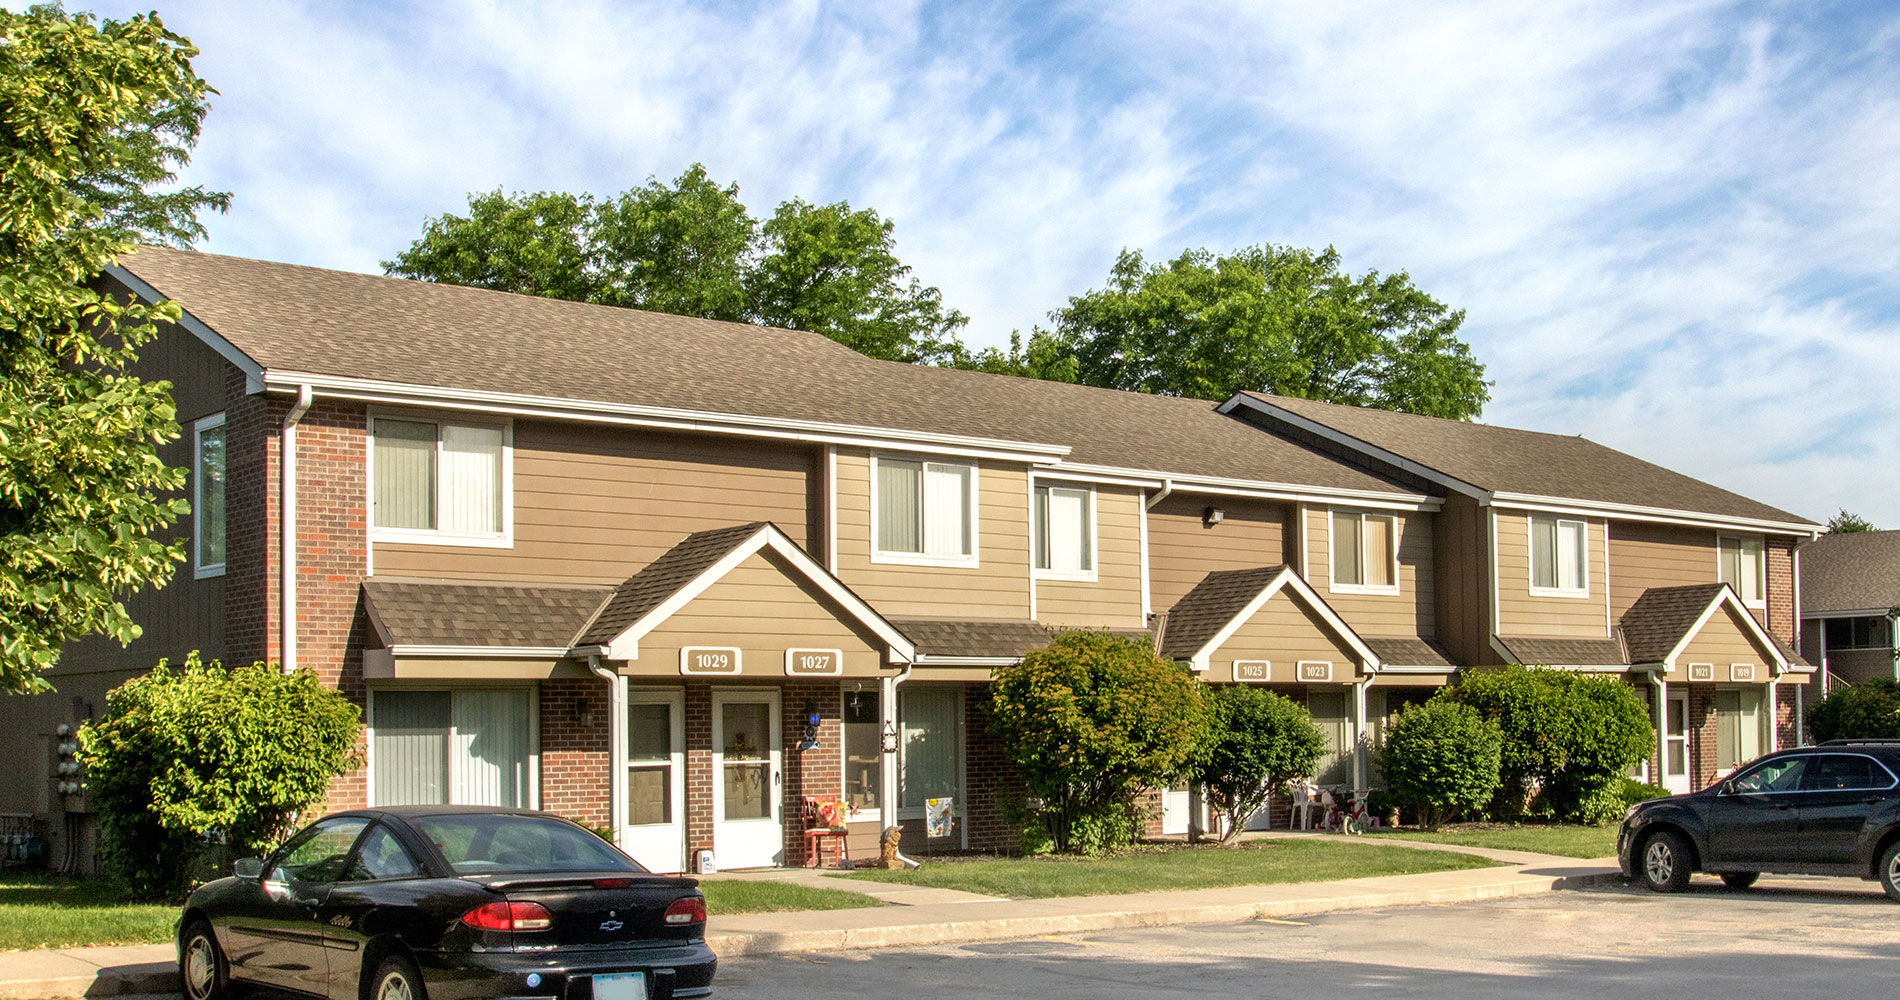 Delaware Crossing Apartments & Townhomes for Rent in Ankeny, IA